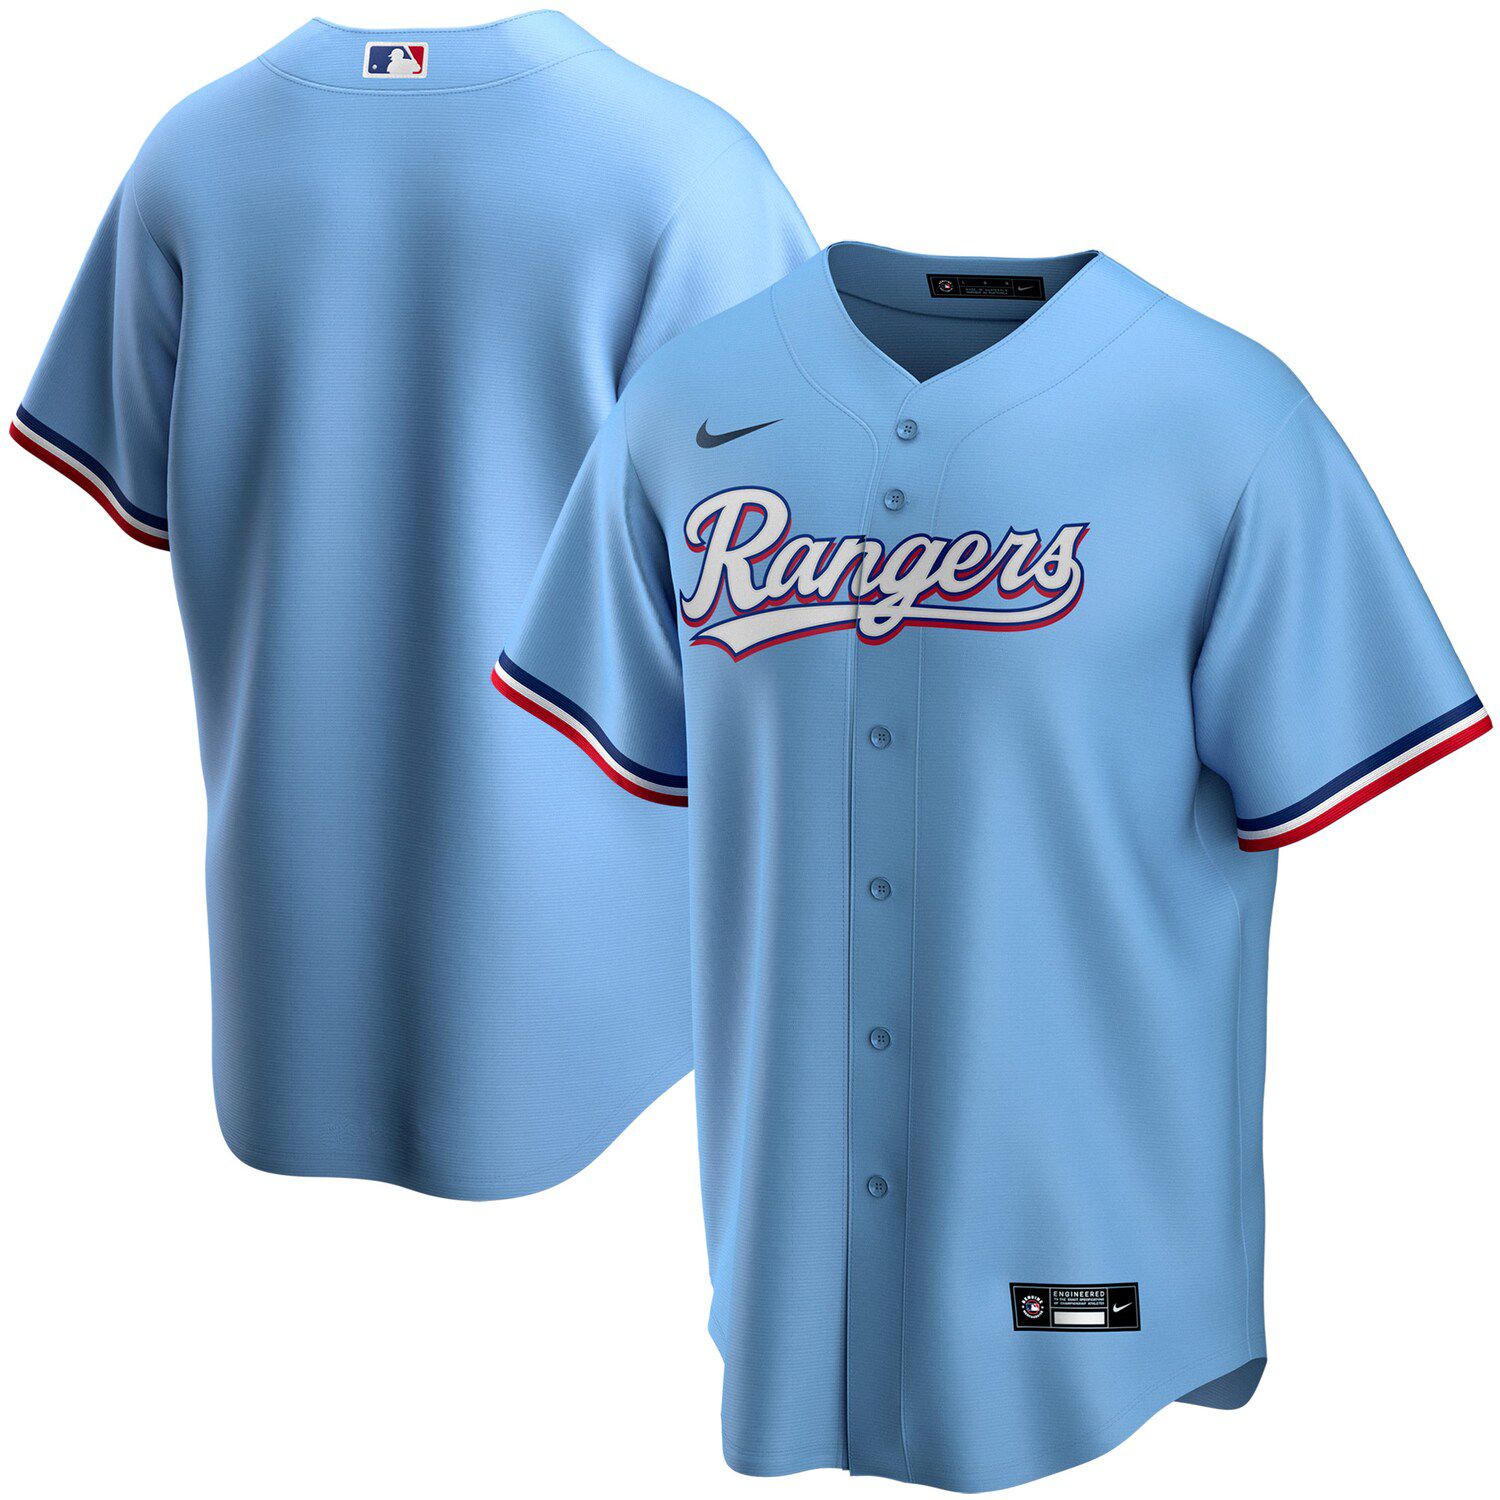 texas rangers youth jersey red